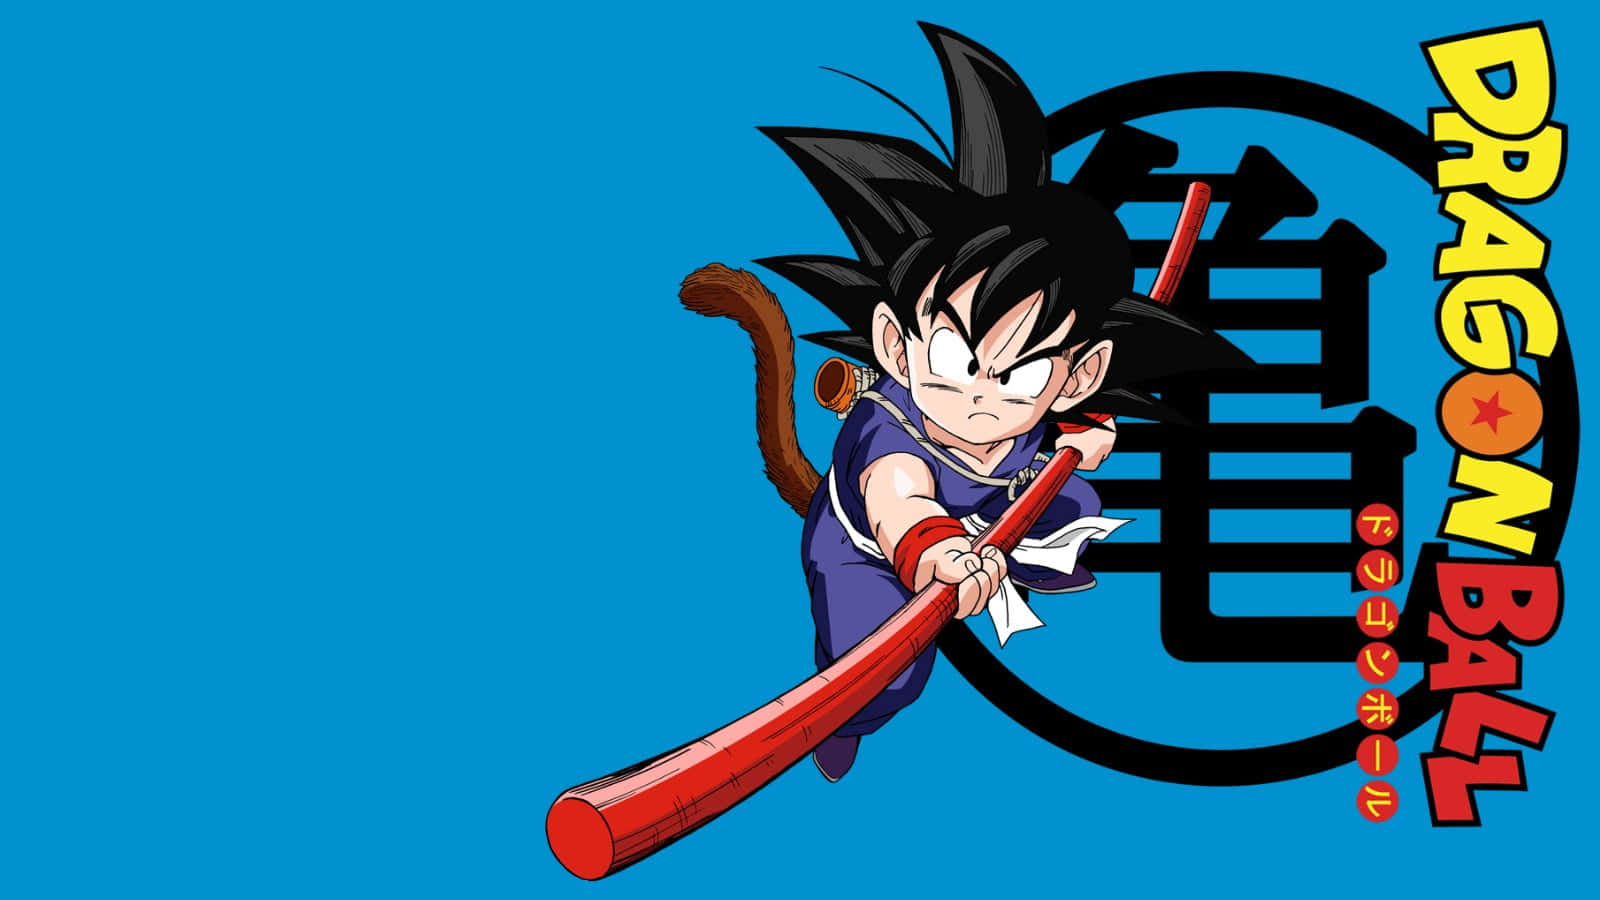 Young Goku On A Quest To Save The World! Wallpaper